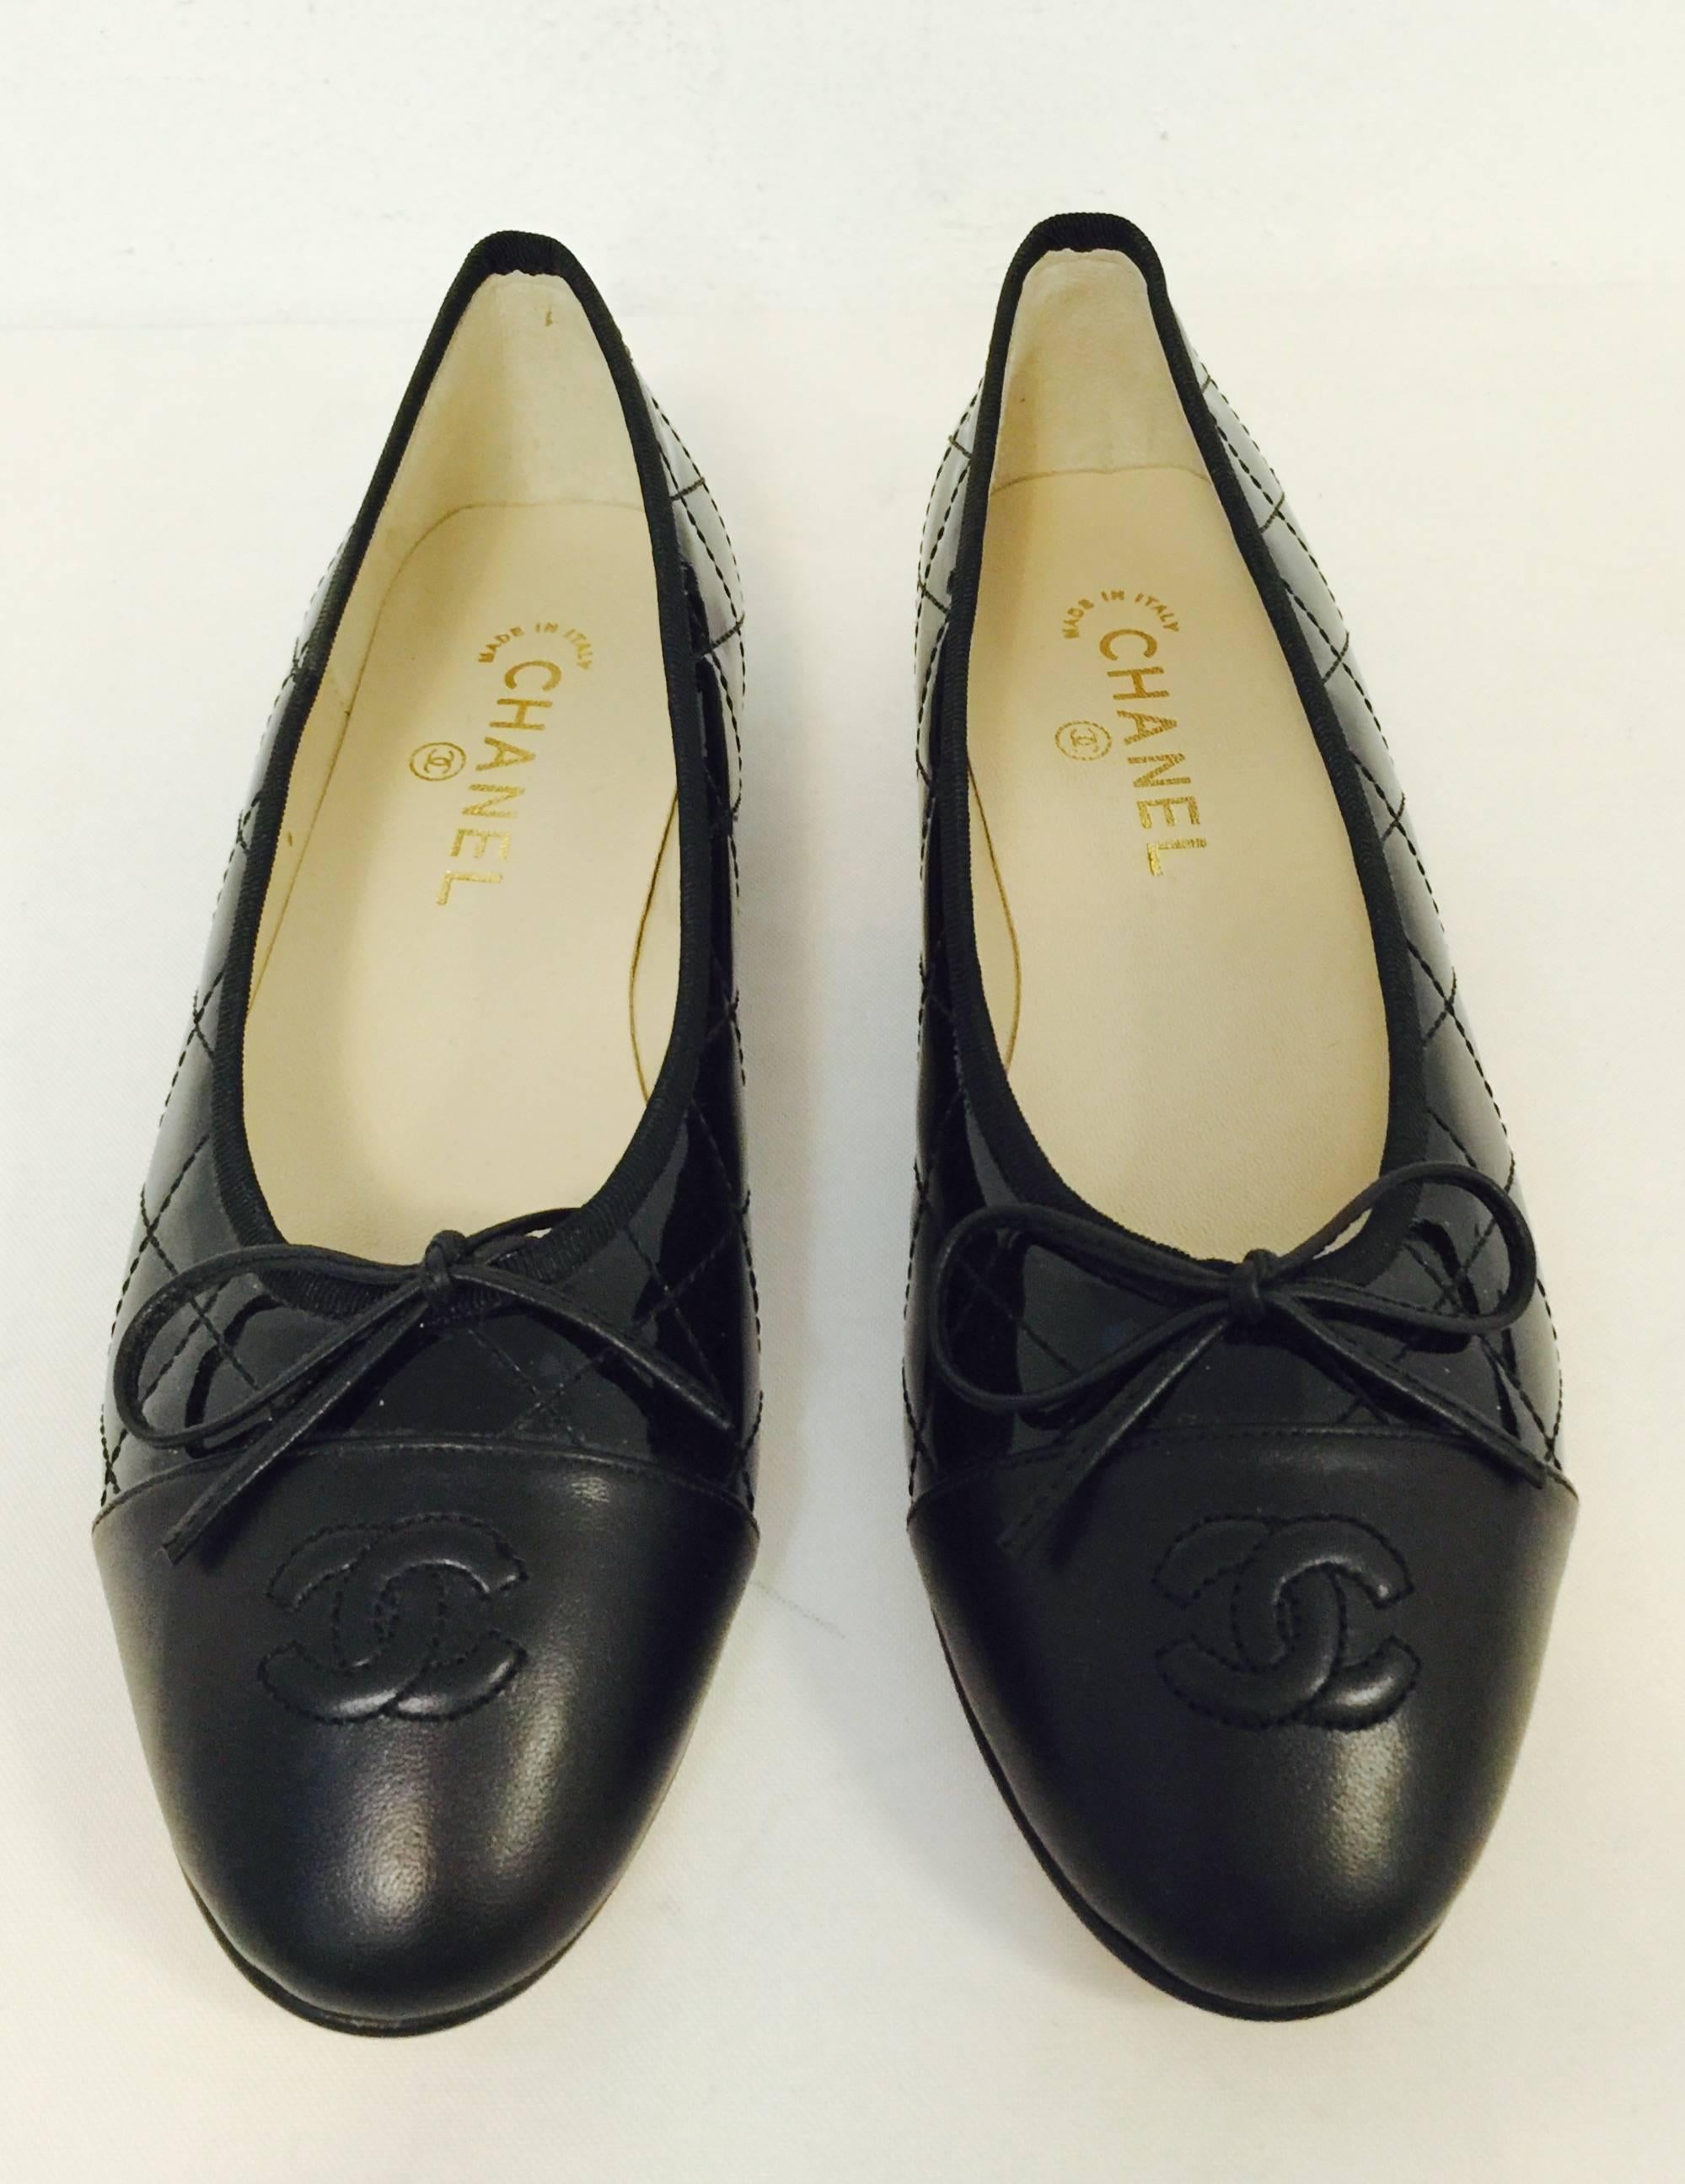 Shine on in these classic Chanel Black Patent Leather Diamond Quilted Ballerina Flats With Black Cap Toes.  Features include leather soles and insoles, double 